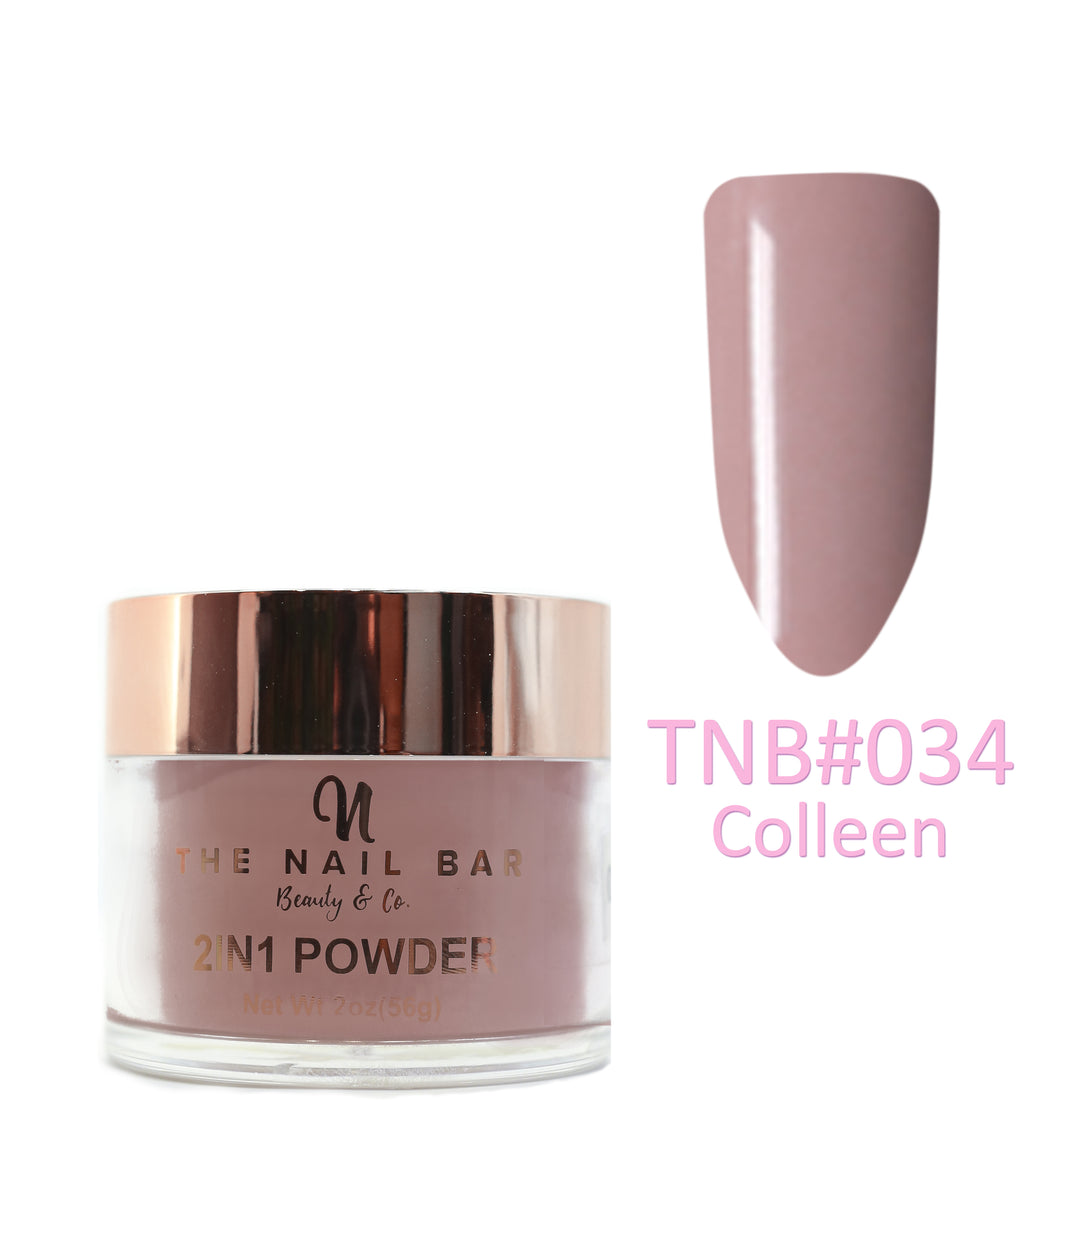 2-In-1 Dipping/Acrylic colour powder (2oz) -Colleen - The Nail Bar Beauty & Co.